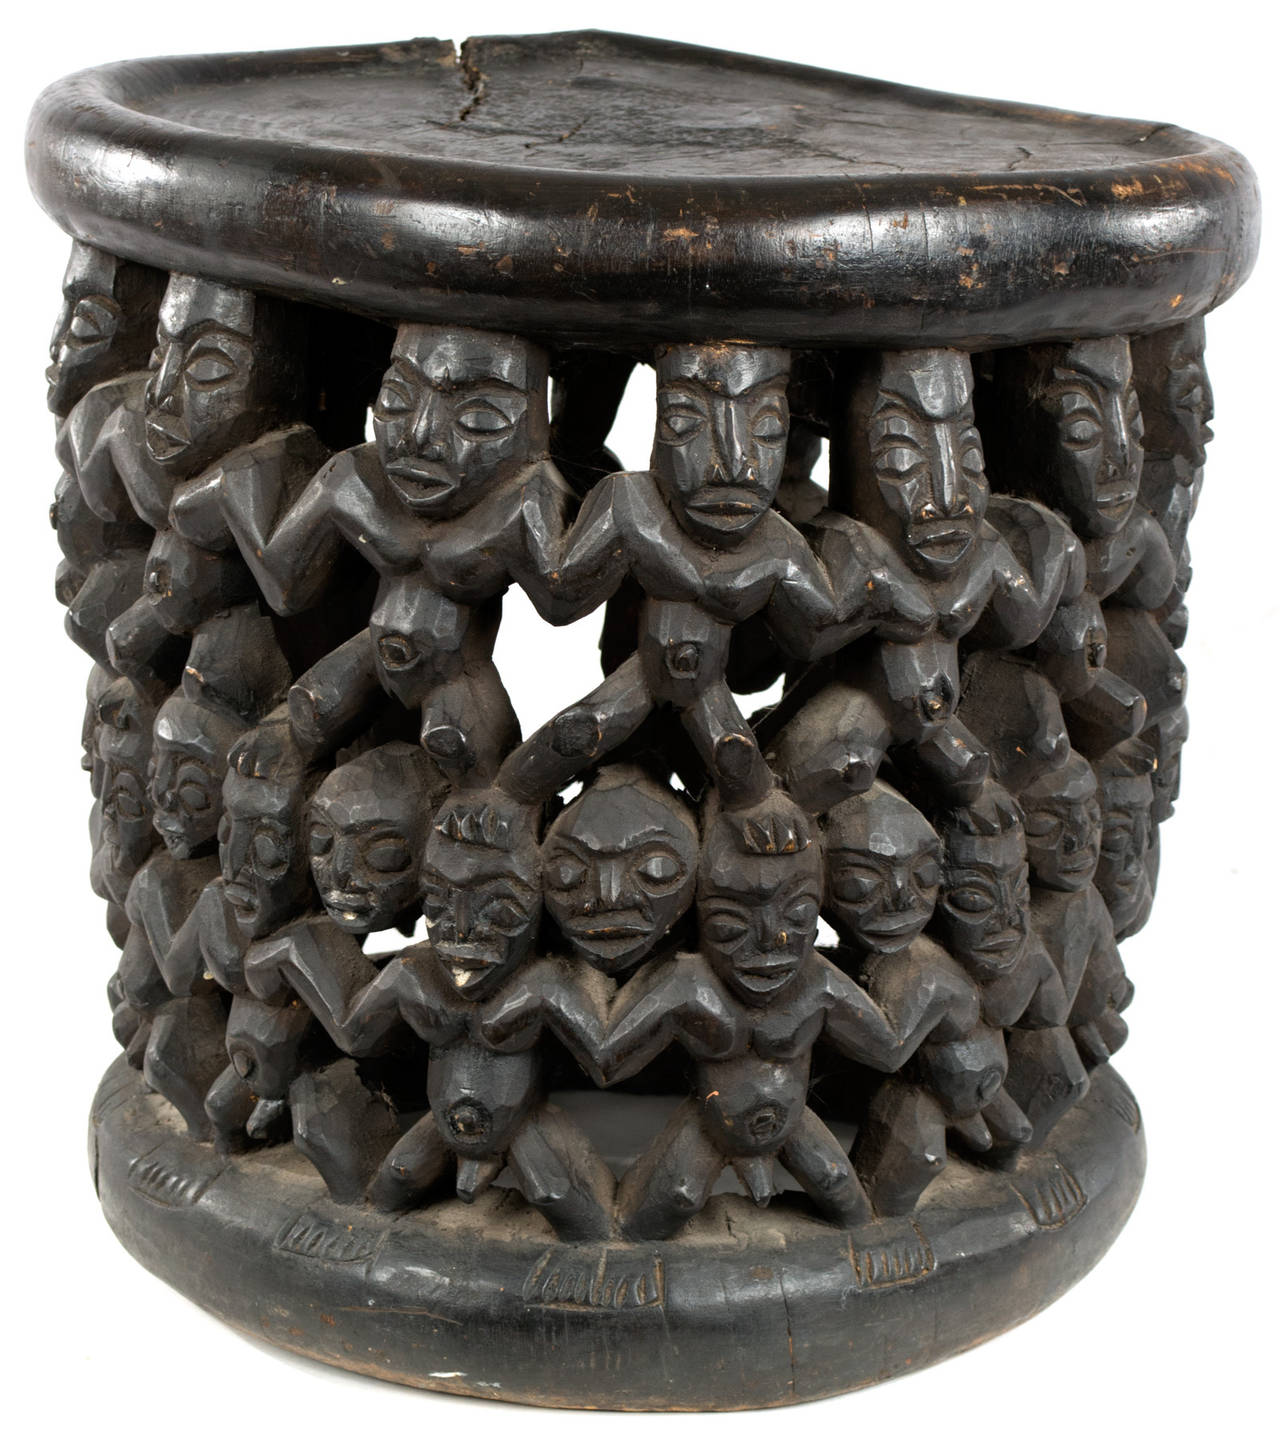 A nineteenth-century Bamileke carved wood throne chair with dozens of figures. Made in Bamileke (i.e. wester Cameroon) the throne chair was used by tribal chiefs or honored figures (Mkem) while presiding over official and religious services. The